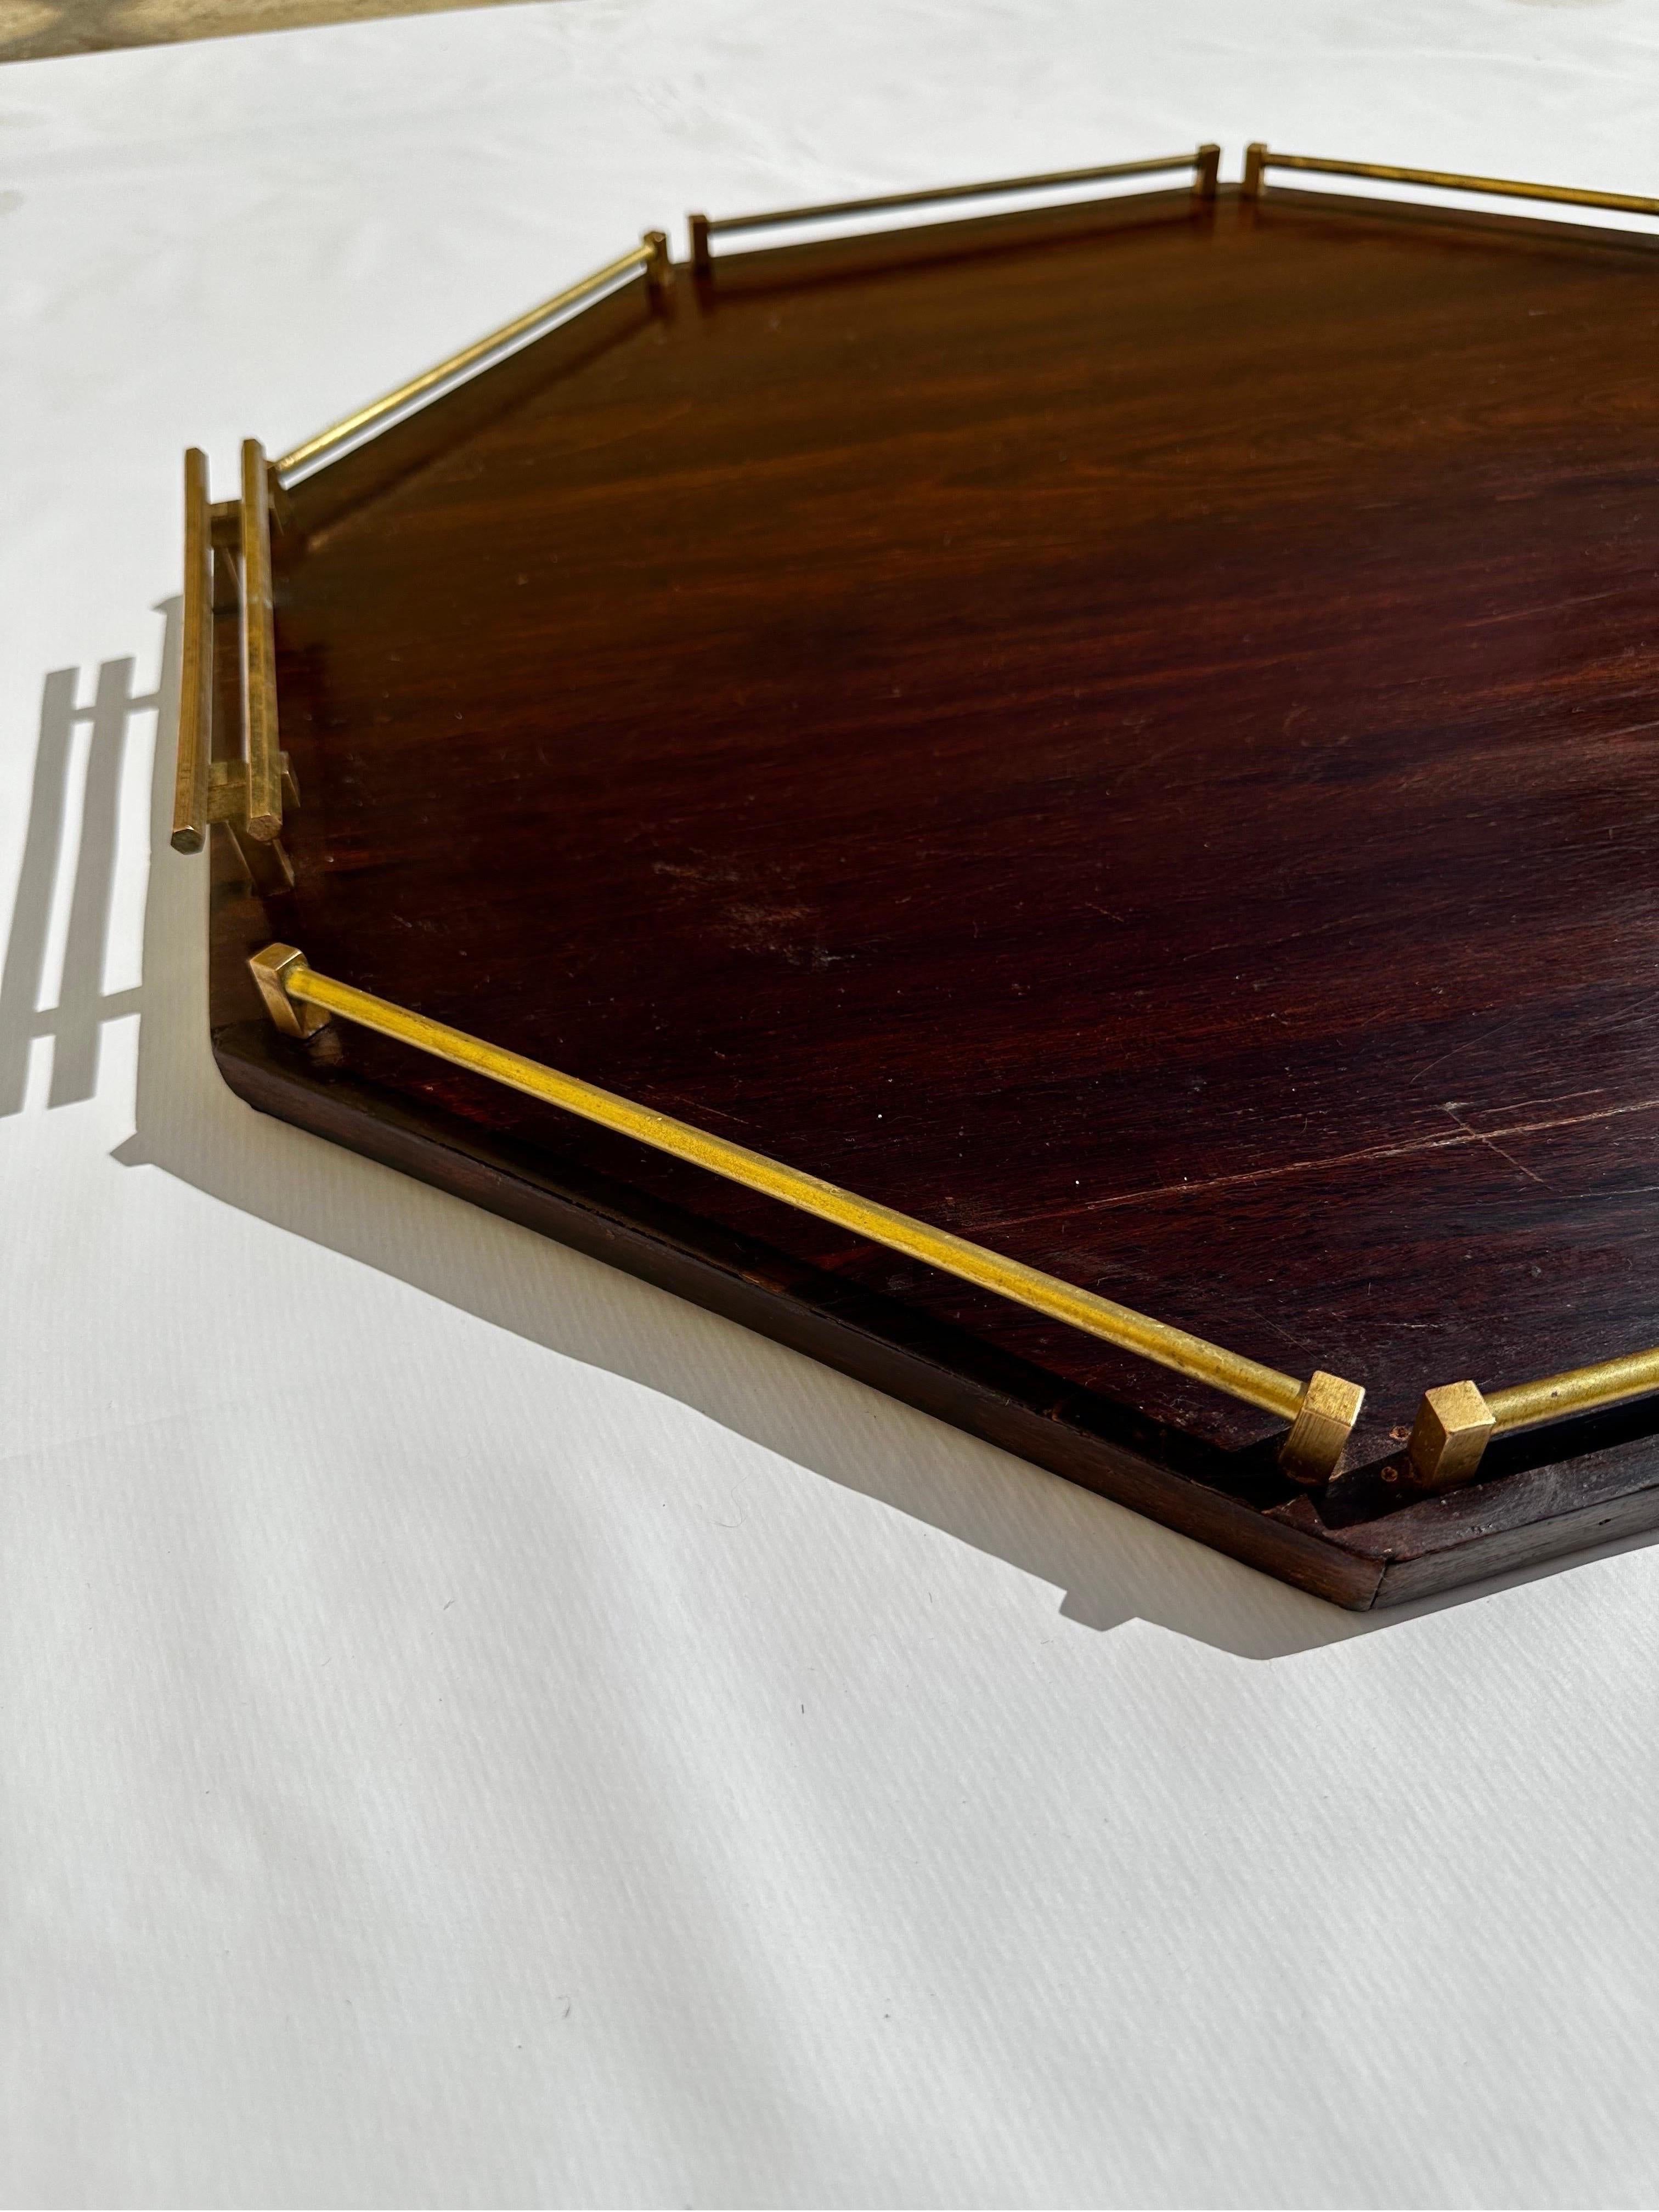 20th Century Brazilian Midcentury Jacarandá Rosewood and Brass Serving Tray, 1960s For Sale